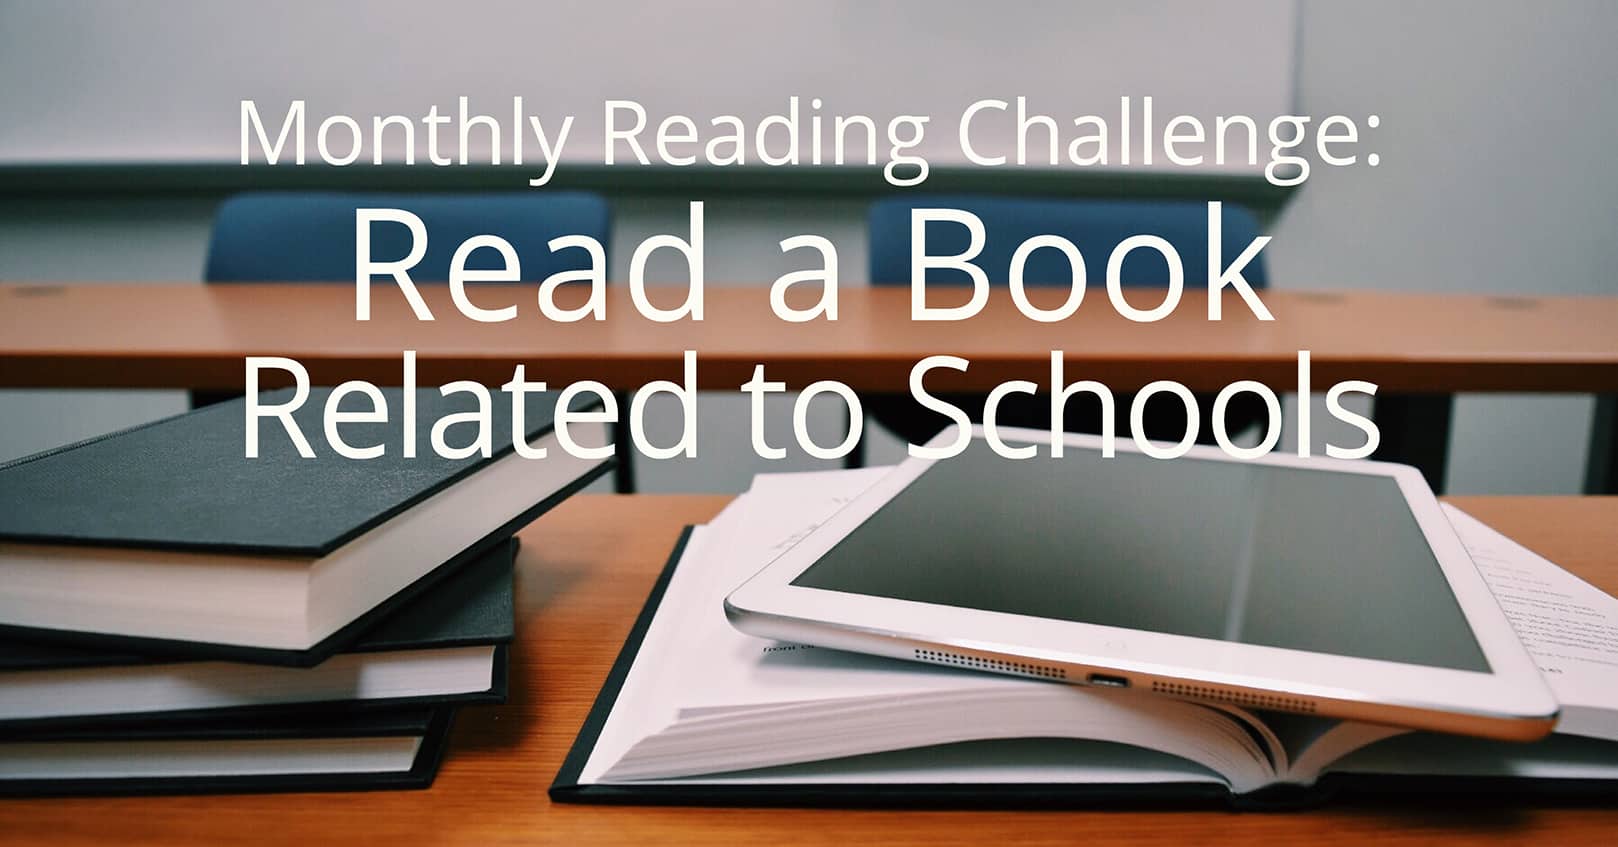 monthly reading challenge - a book related to schools